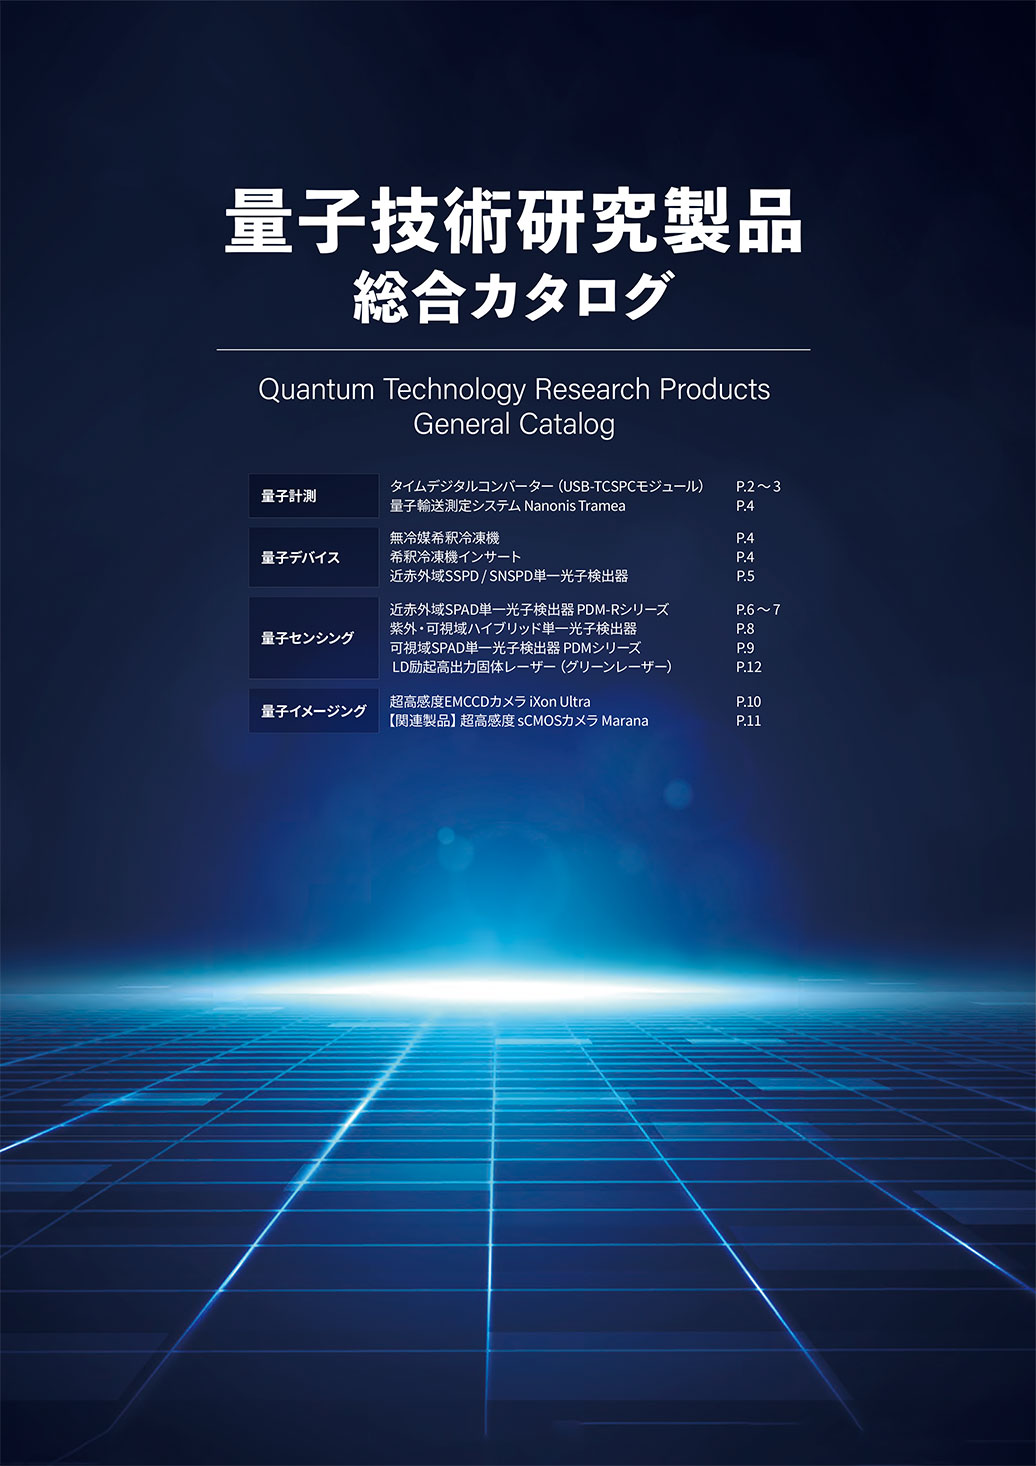 Quantum Technology Research Products